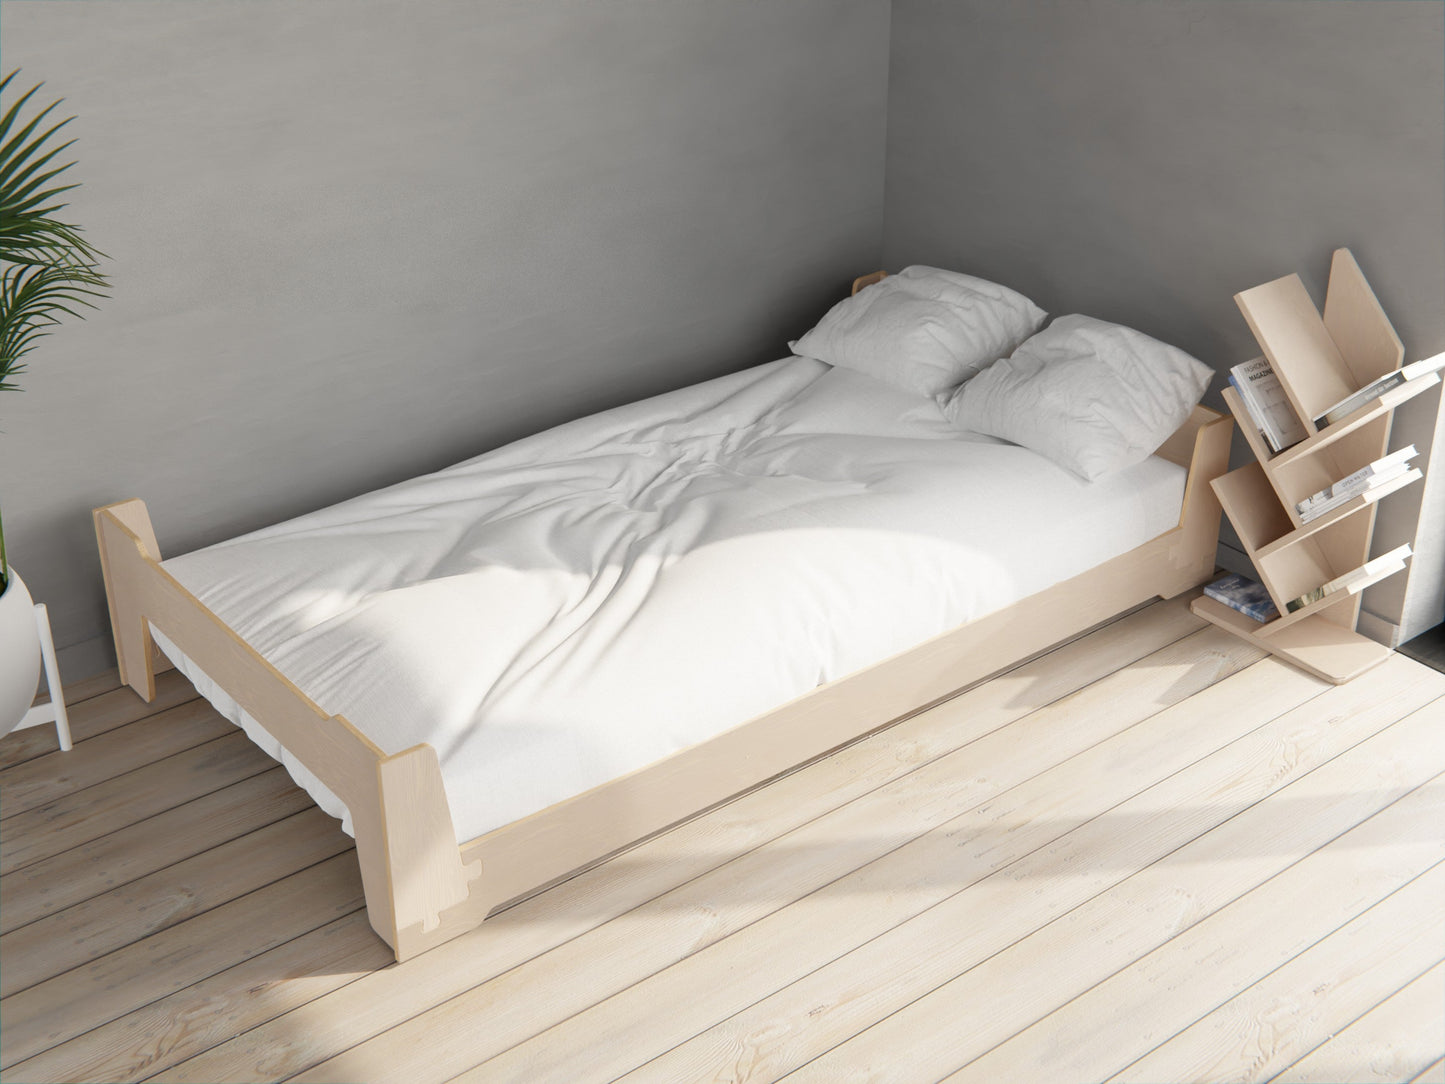 Low flippable bed from natural materials for kids